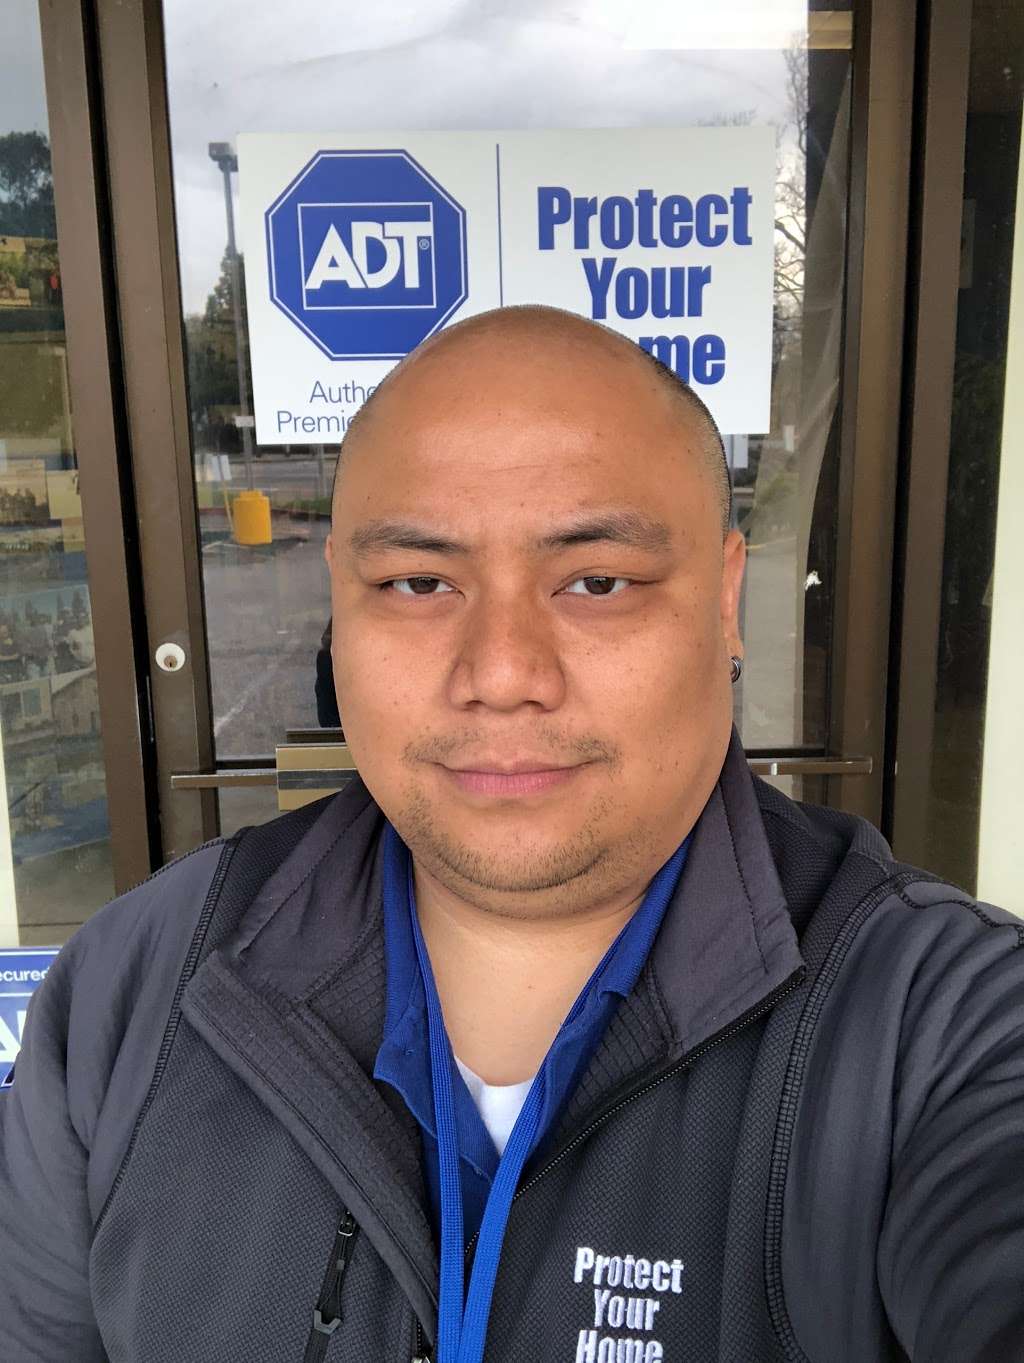 Protect Your Home – ADT Authorized Premier Provider | 995 Oliver Rd Suite 11, Fairfield, CA 94534, USA | Phone: (707) 416-2416